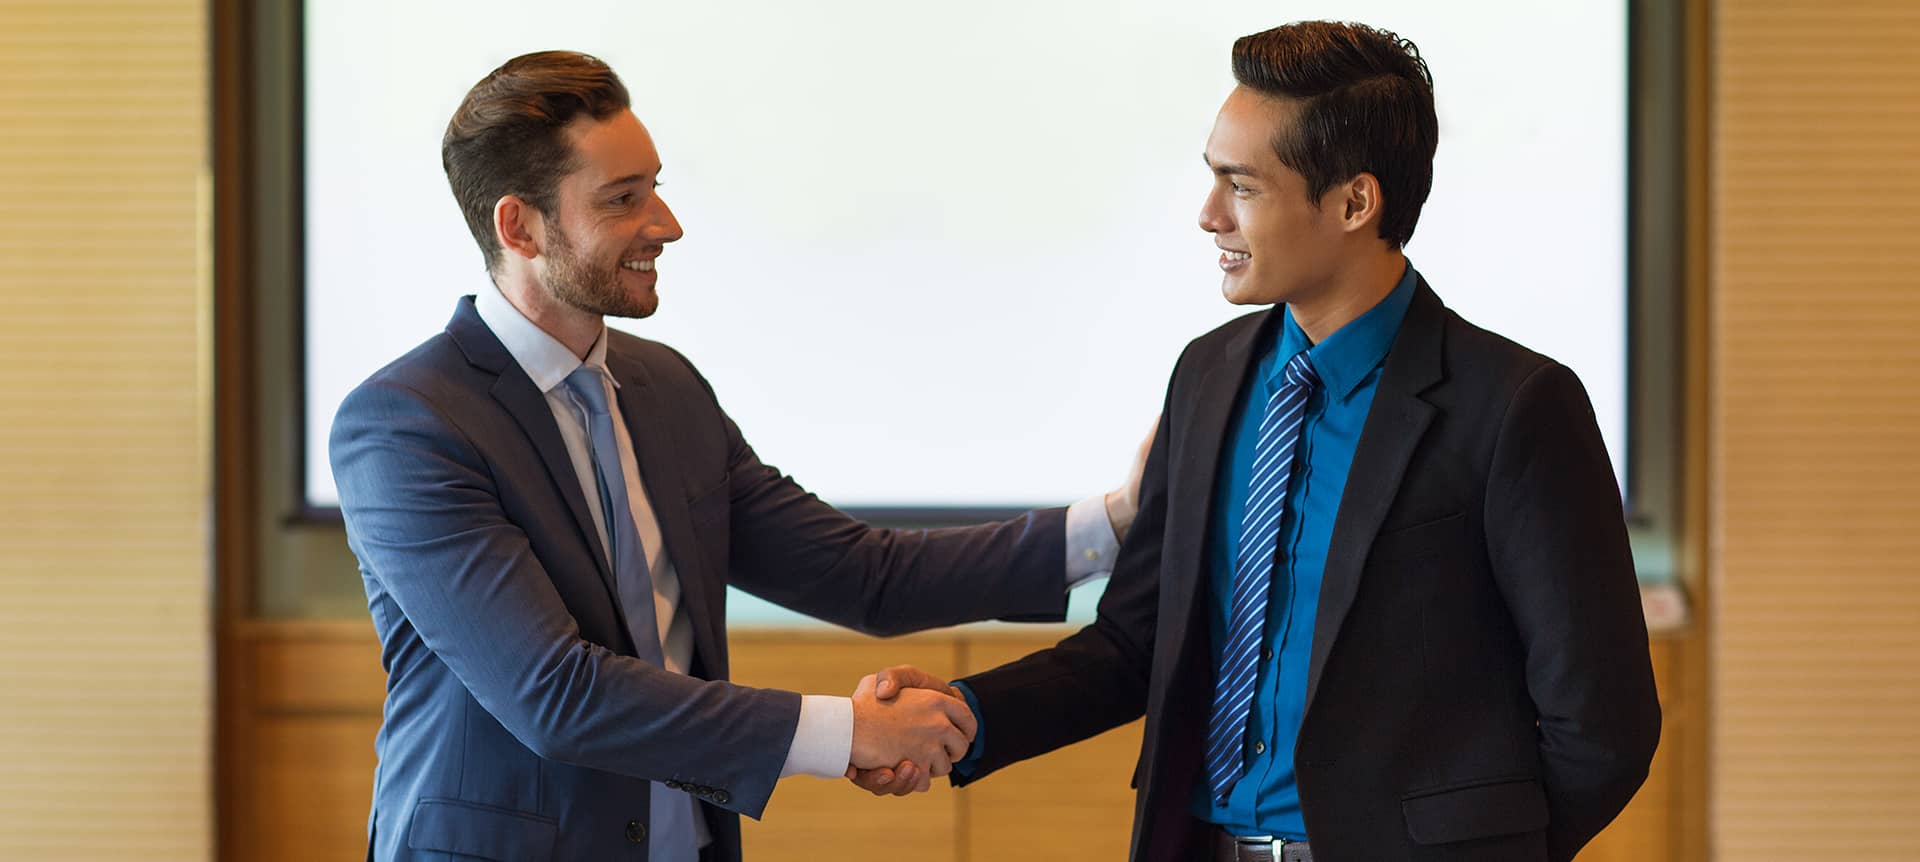 Recruiter and candidate shaking hands